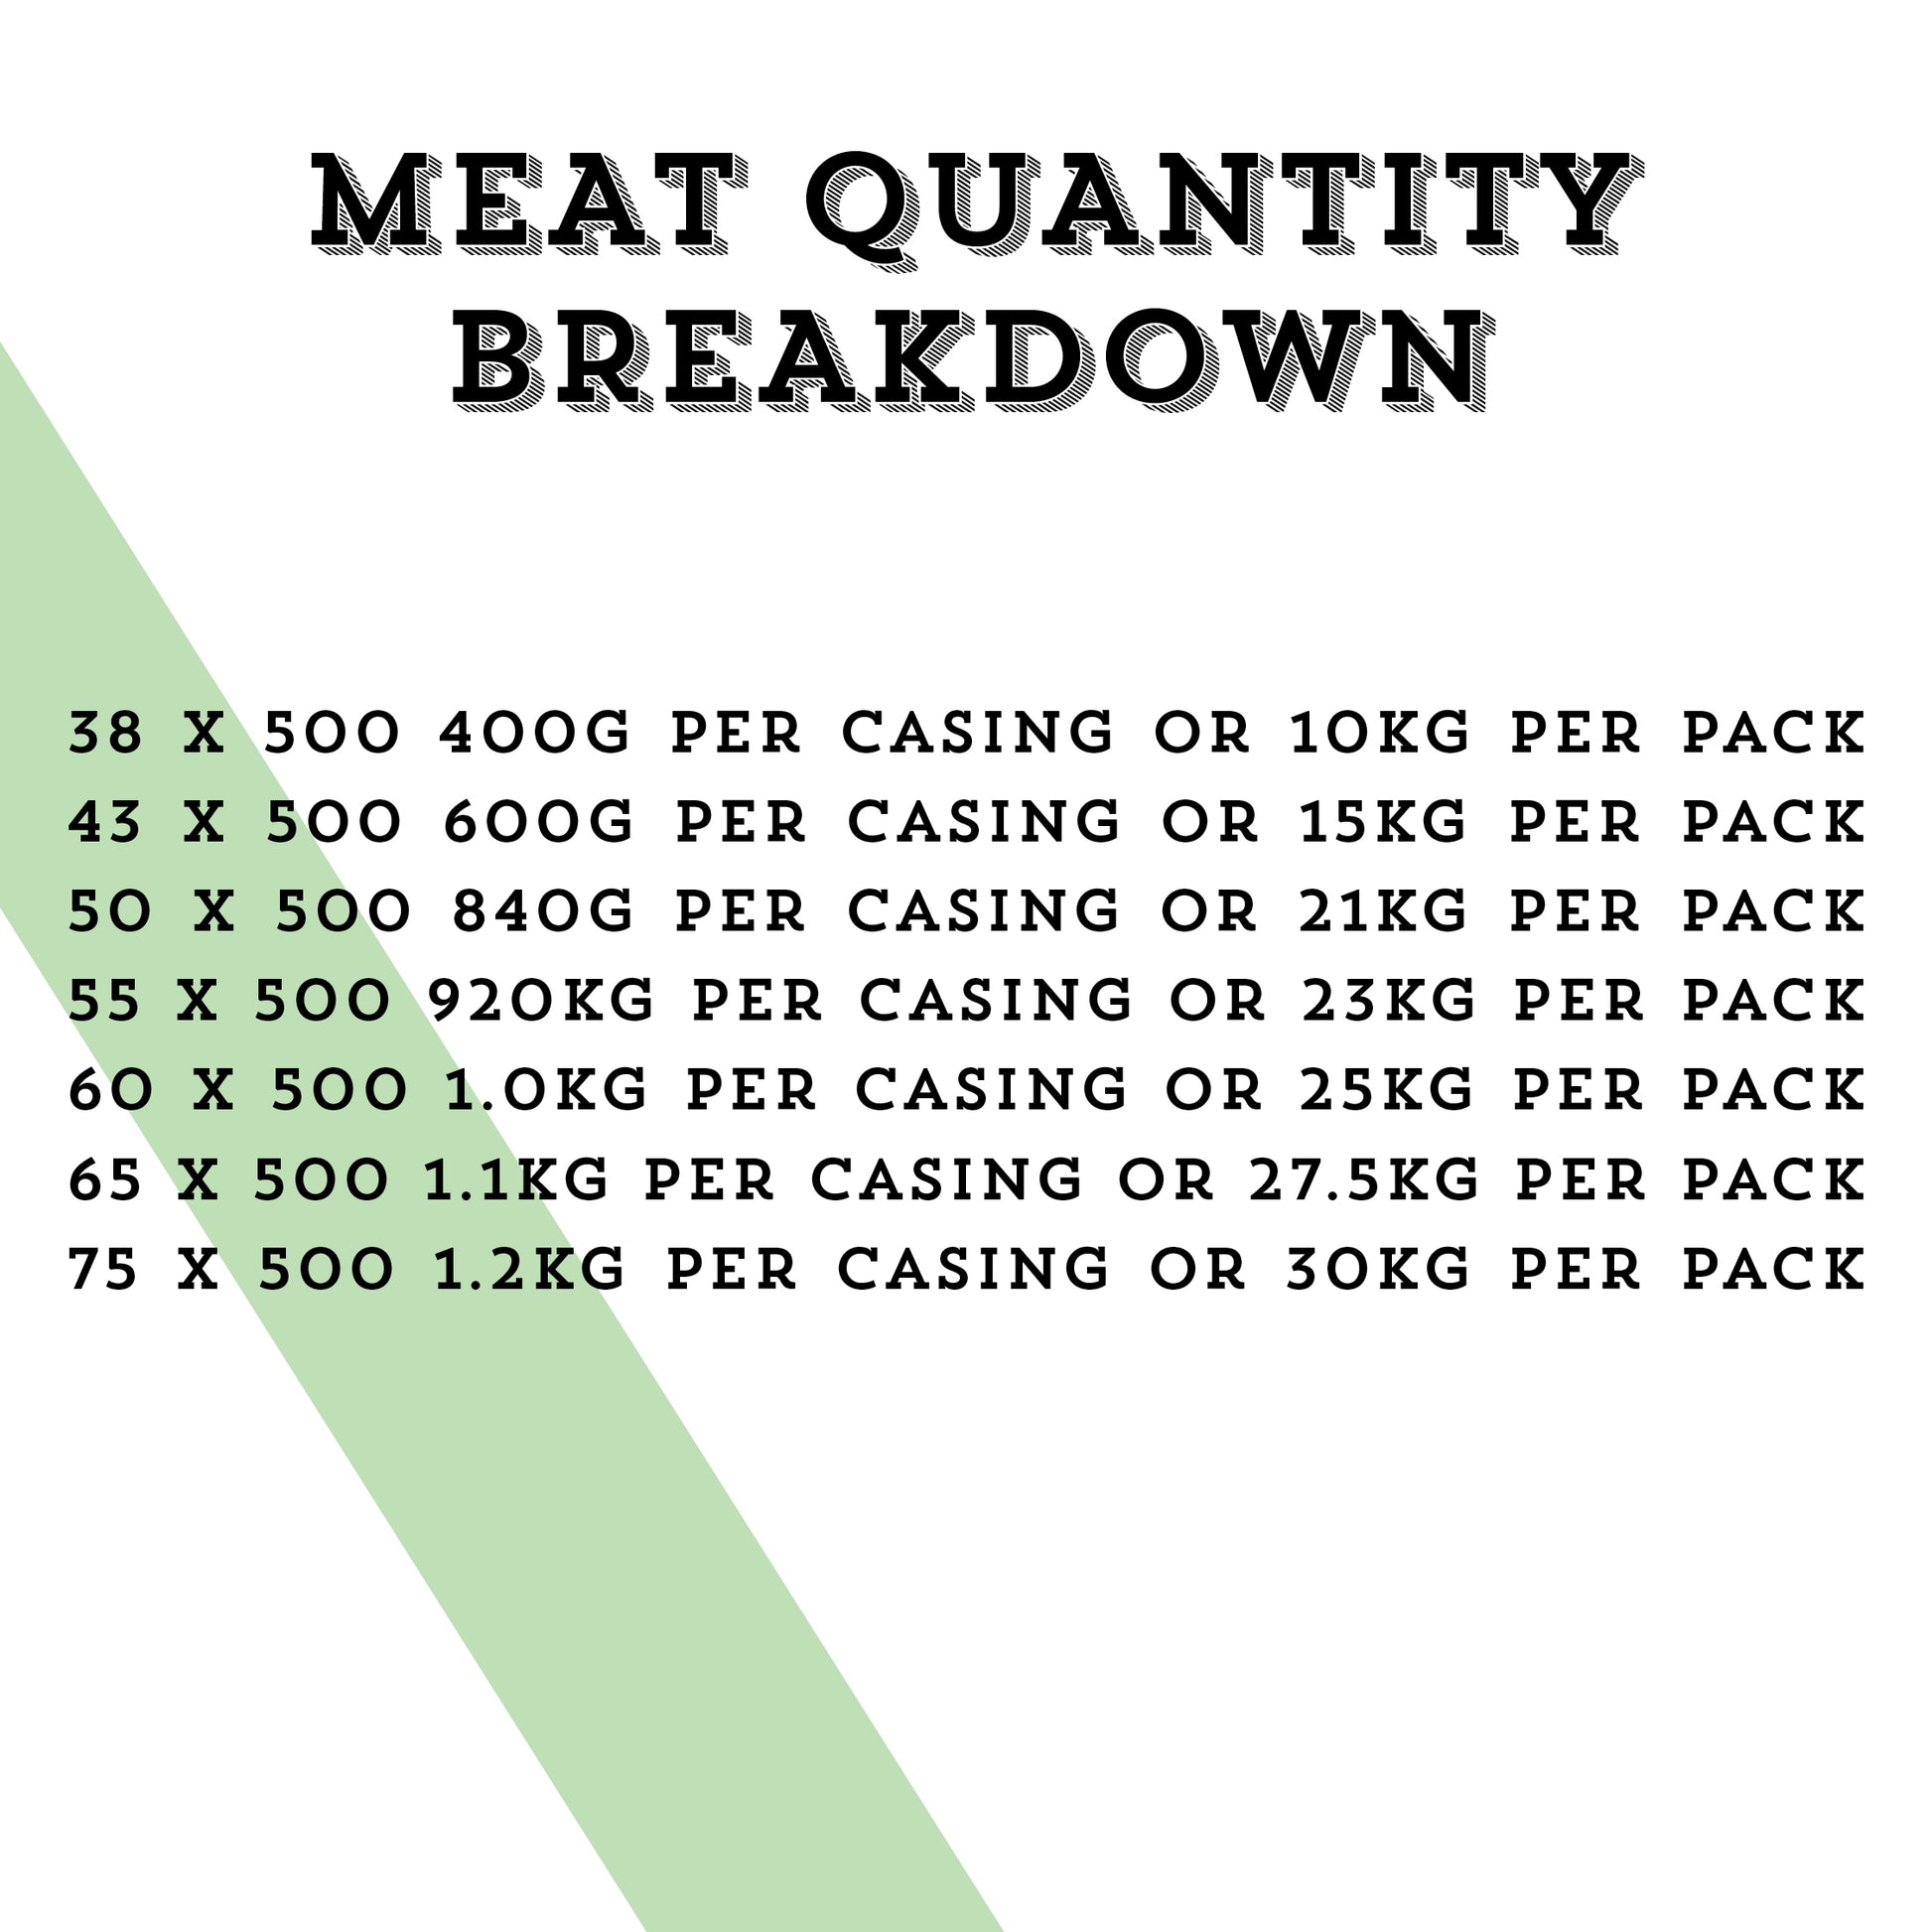 Graphic advising how much meat can be used per collagen casing.